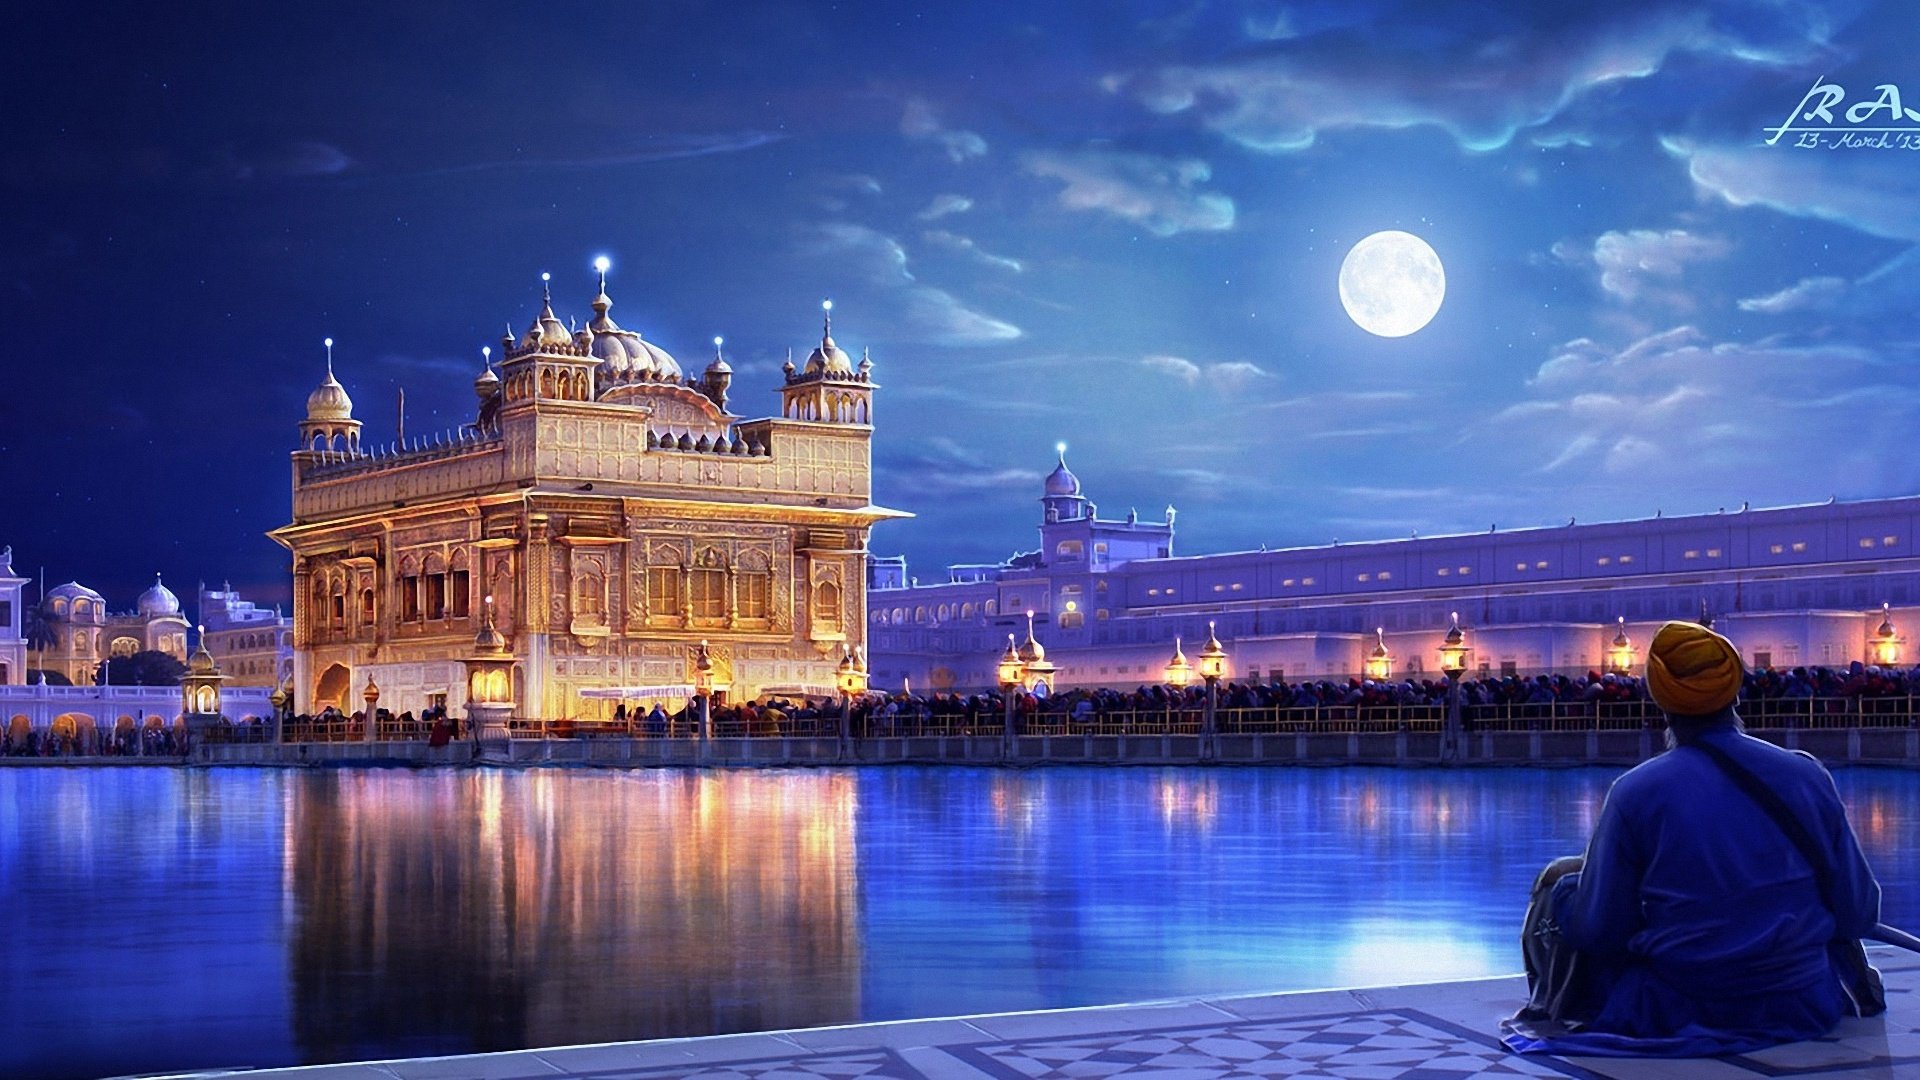 india, The, Golden, Temple, Sky, Amazing, Beautiful, Moon, Landscape, Water, Fantasy Wallpaper